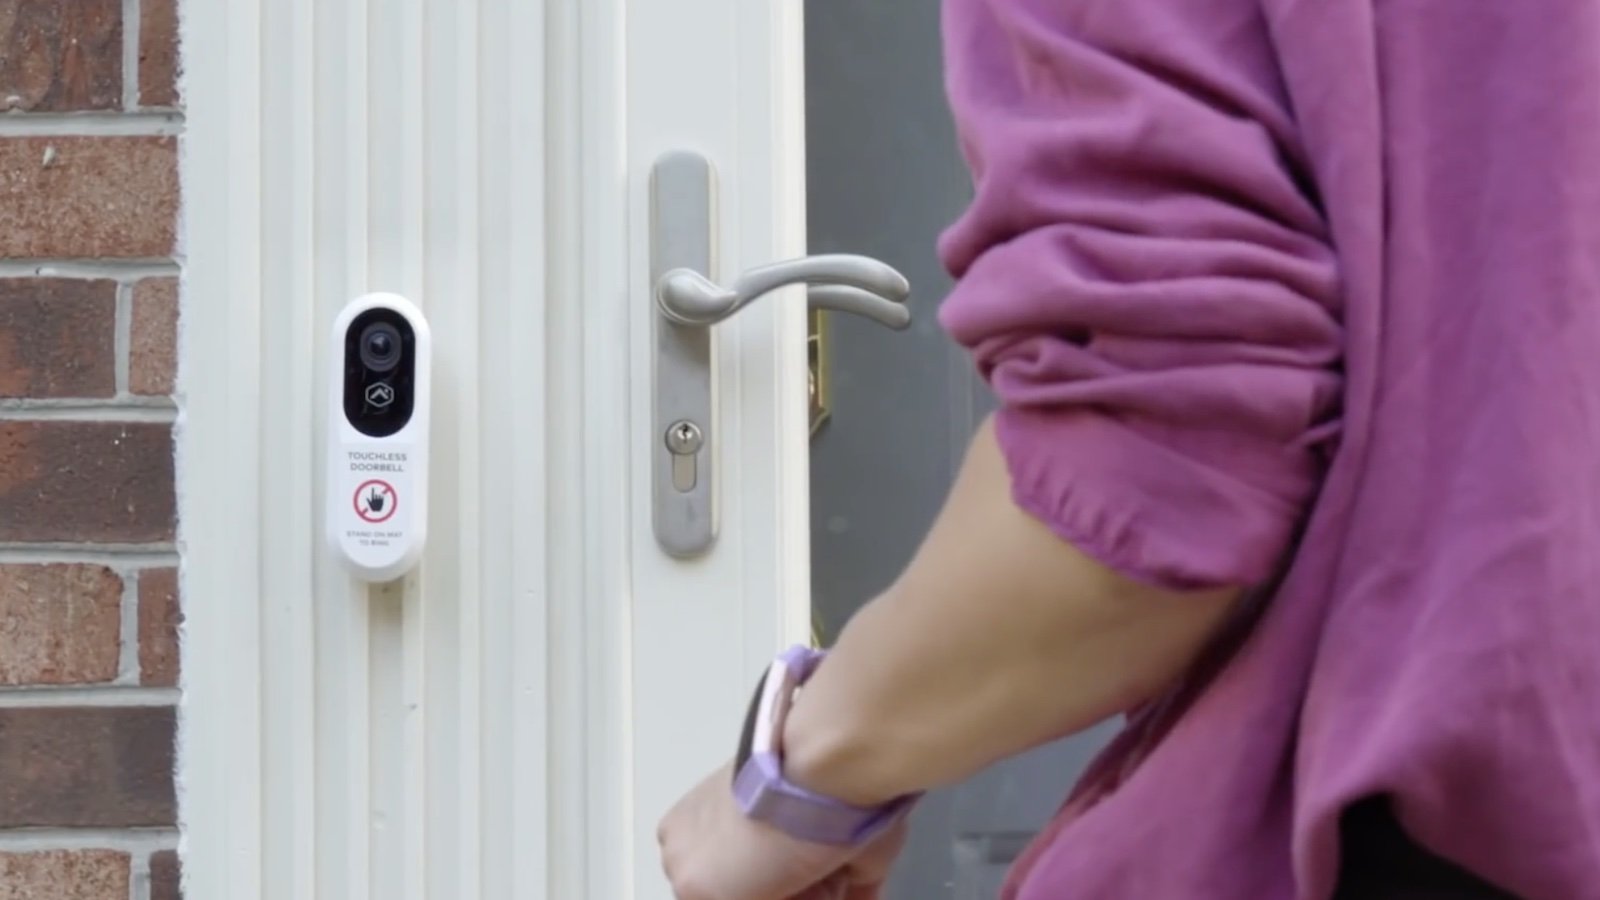 Alarm.com Touchless Video Doorbell rings without contact